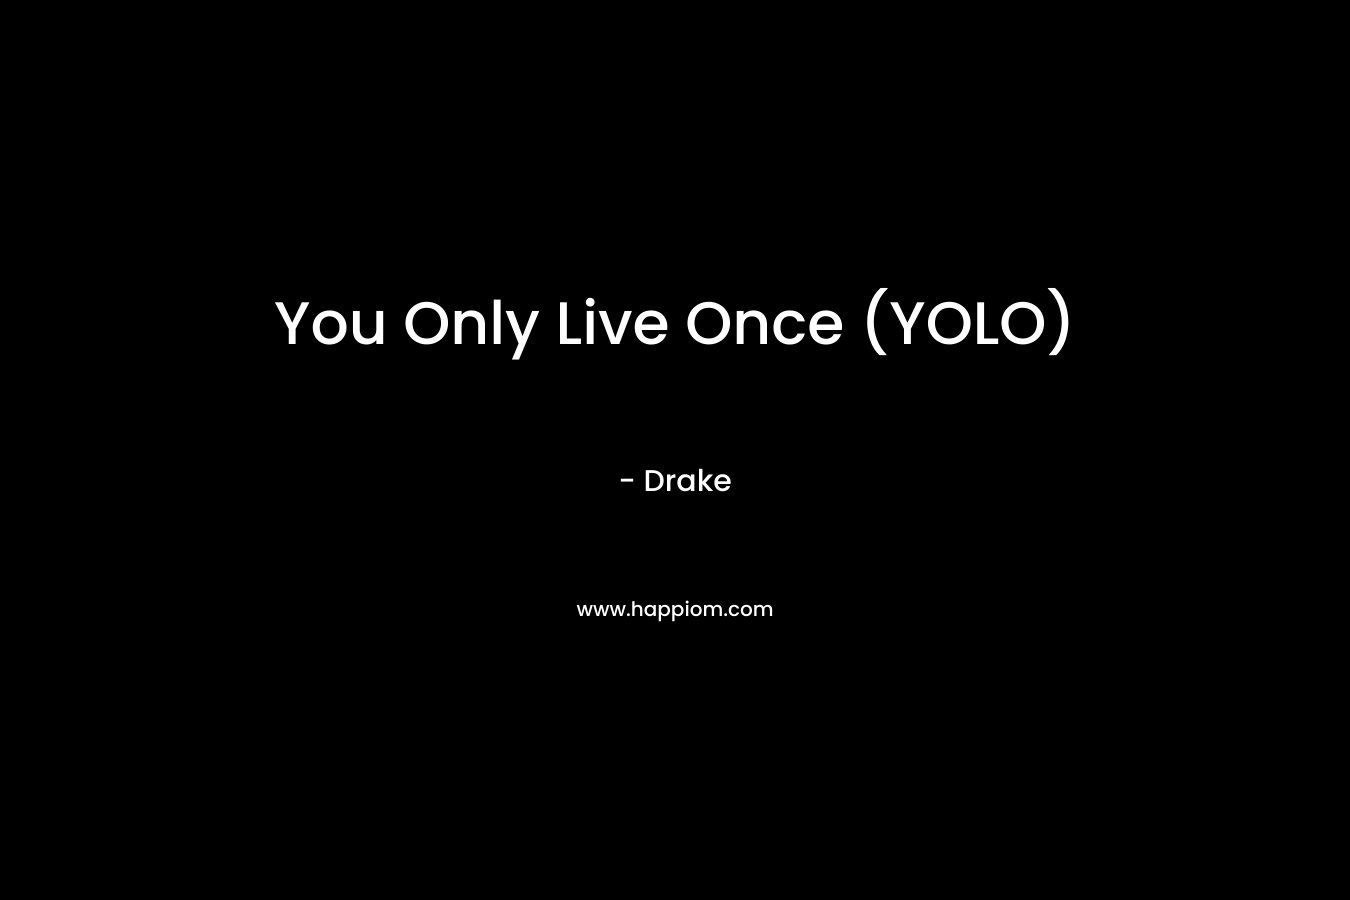 You Only Live Once (YOLO) – Drake